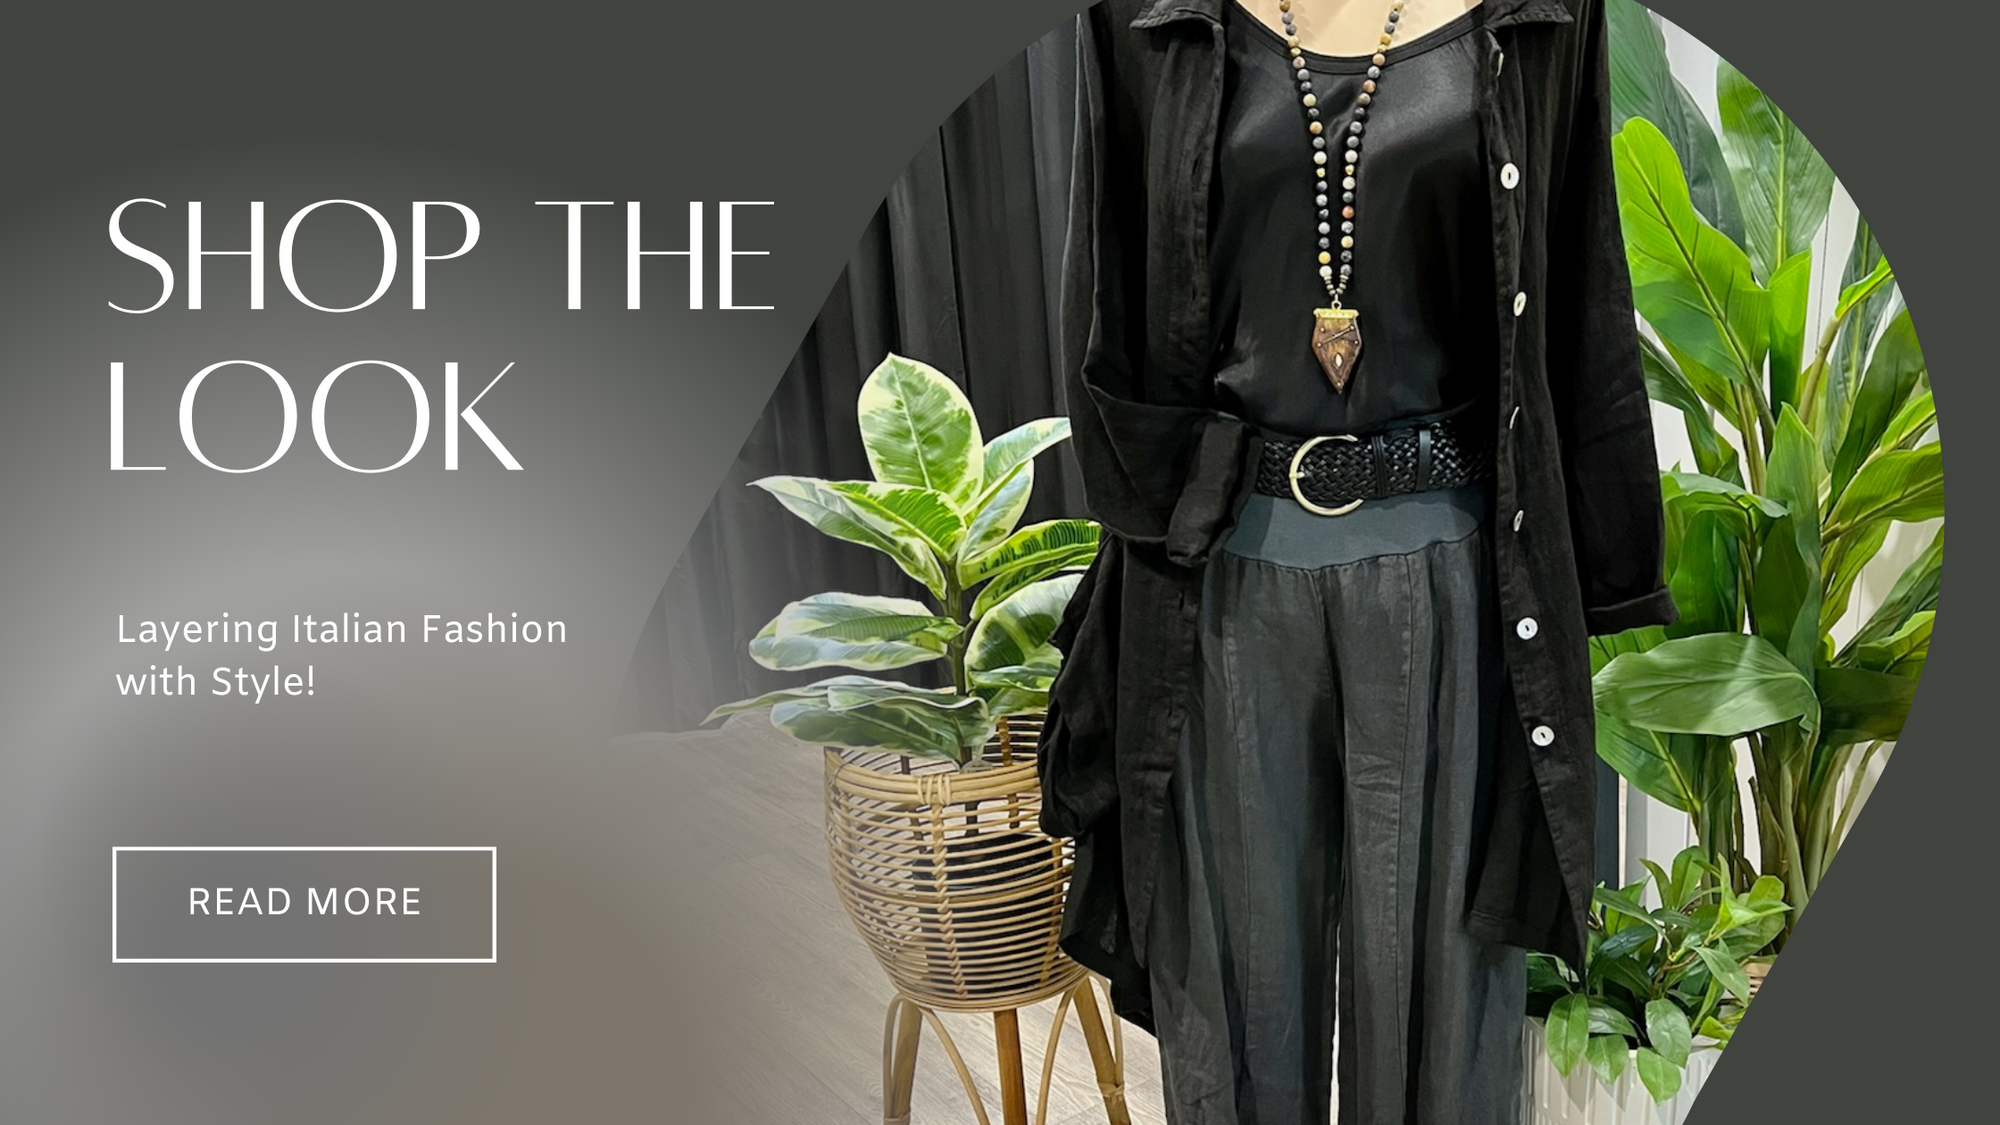 Shop the Look - Layering Italian Fashion with Style